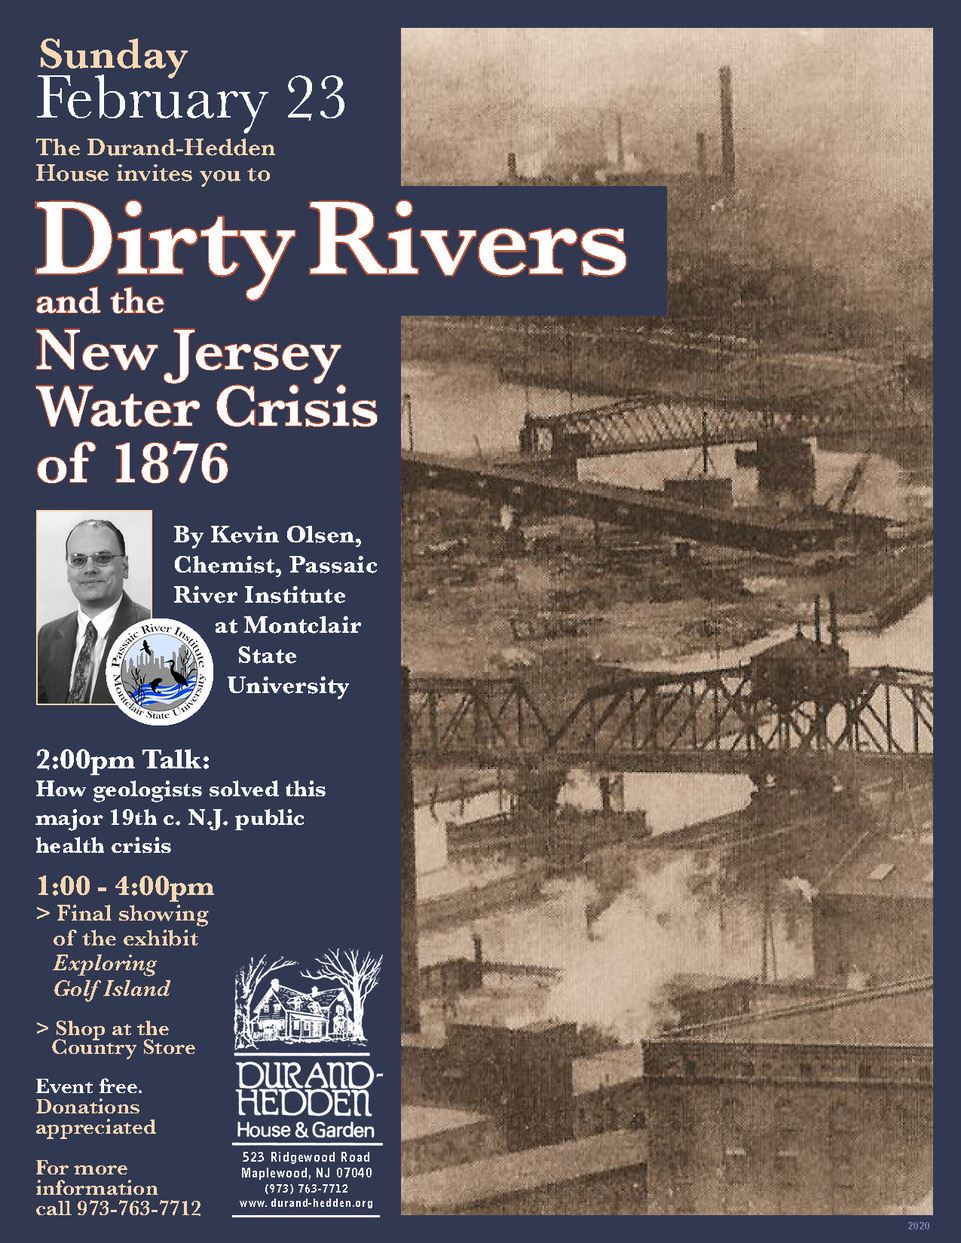 Durand-Hedden Hosts 'Dirty Rivers and the New Jersey Water Crisis of 1876' on Sunday, Feb. 23 - The Village Green